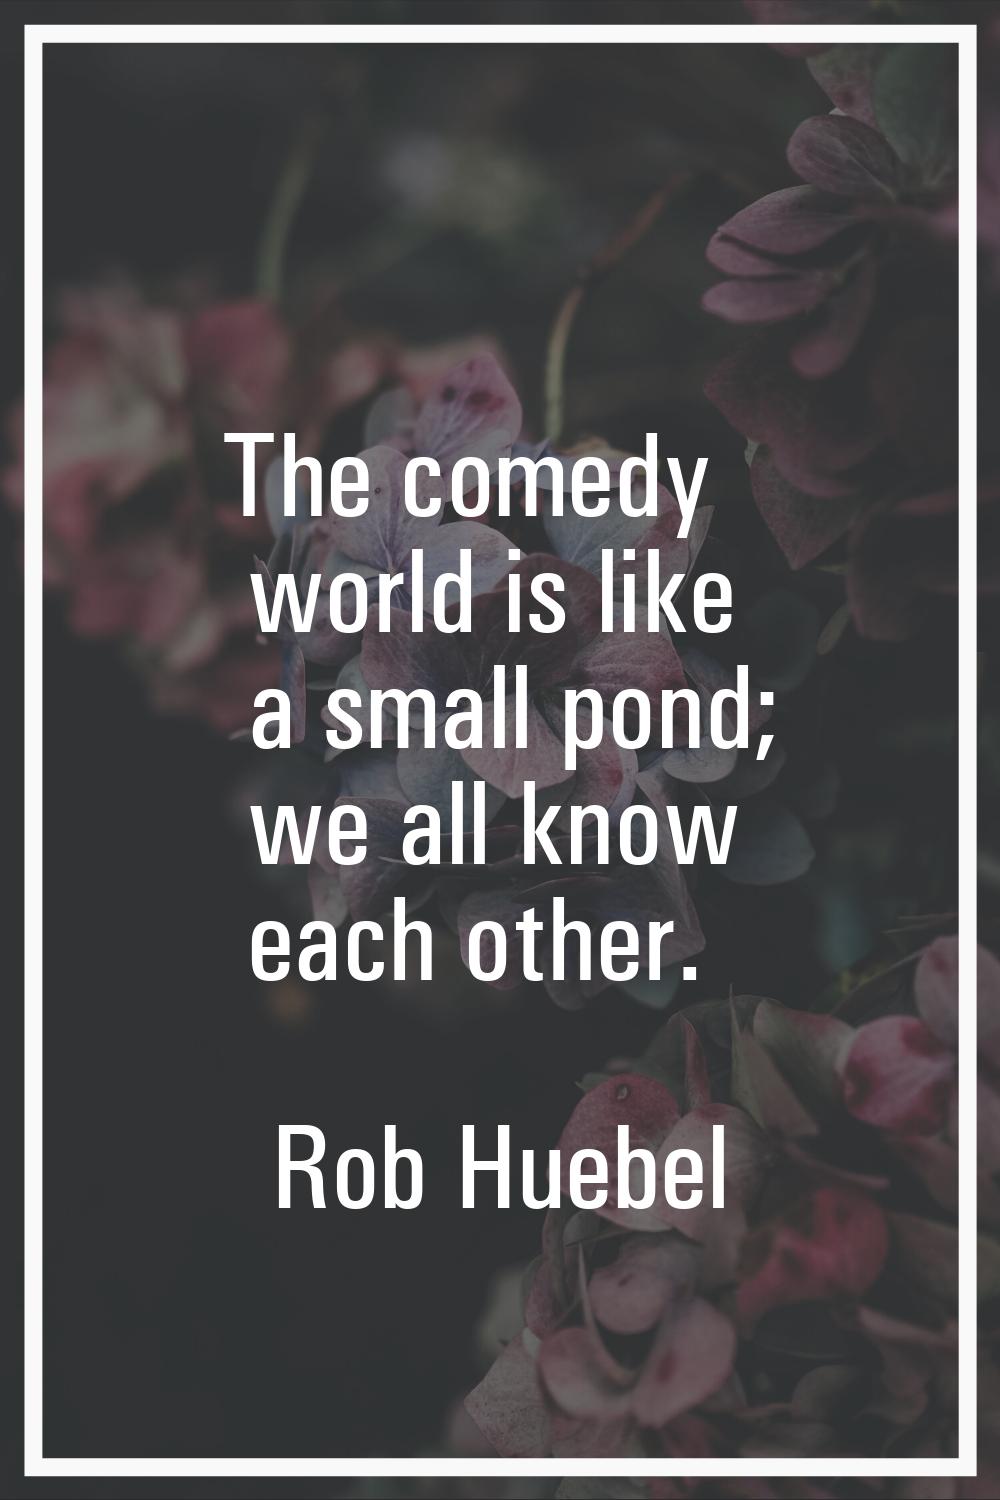 The comedy world is like a small pond; we all know each other.